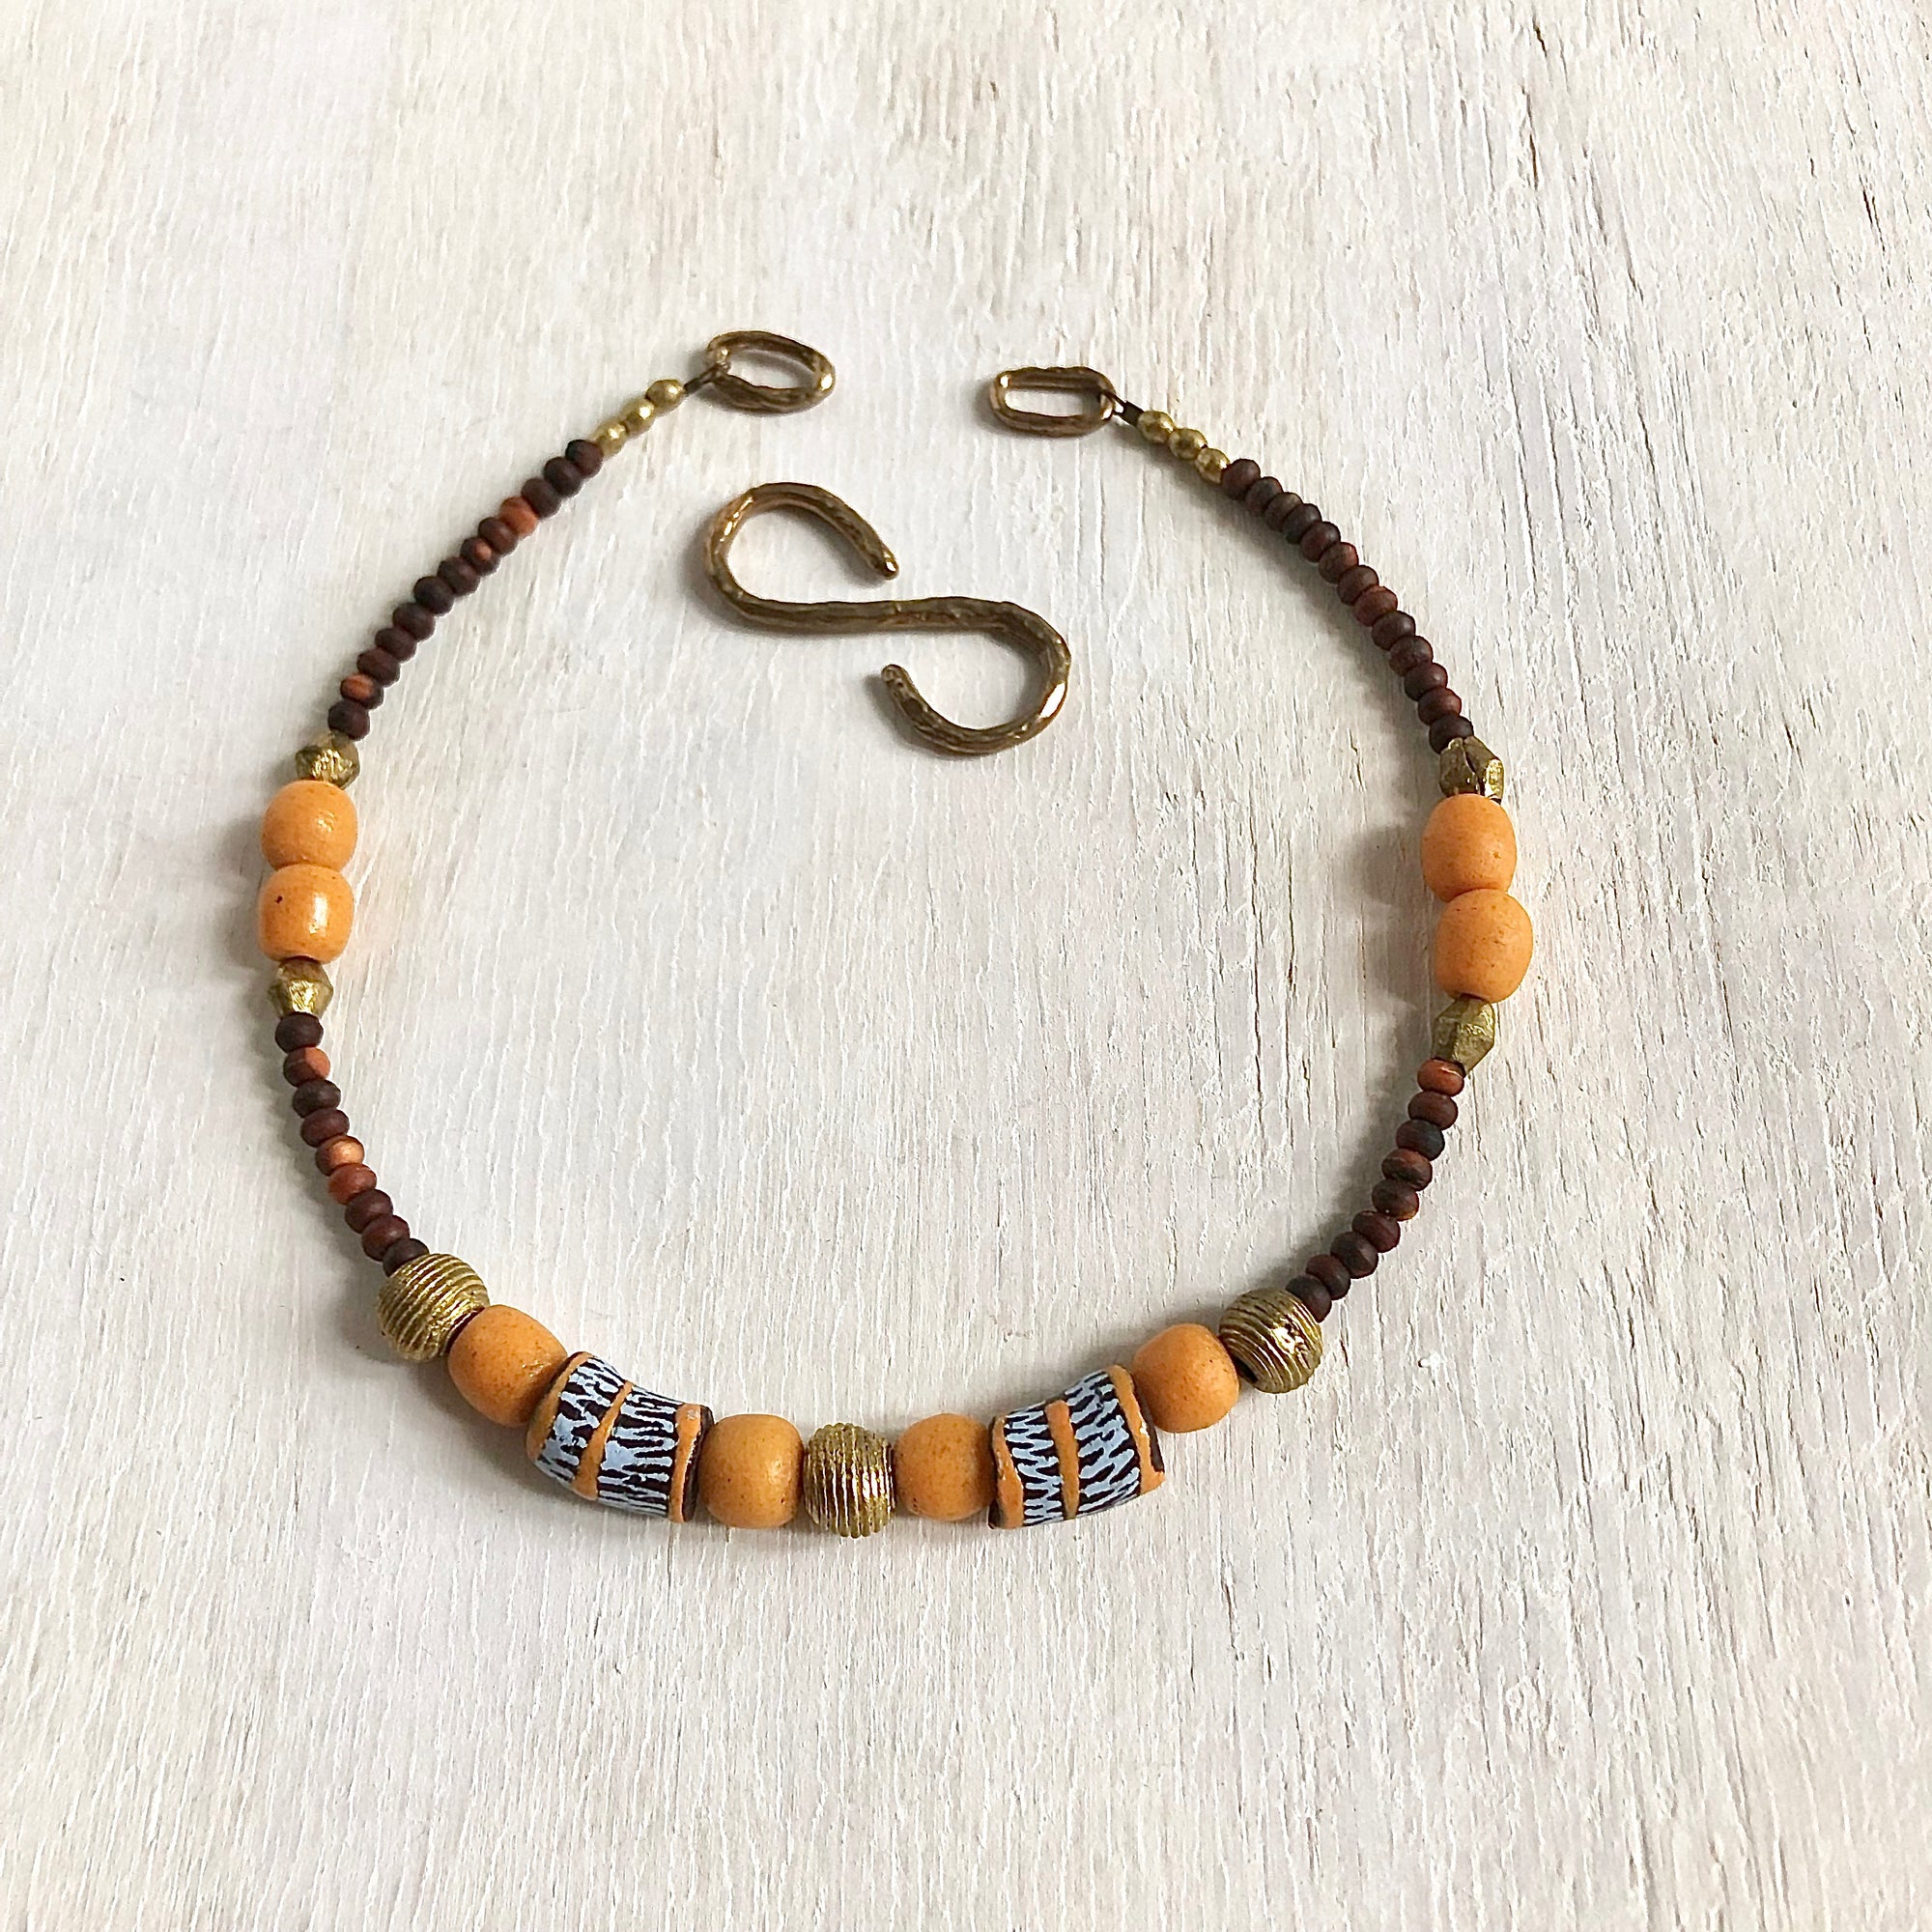 1940 African Multi Gemstone Beaded Necklace – Vintage by Misty